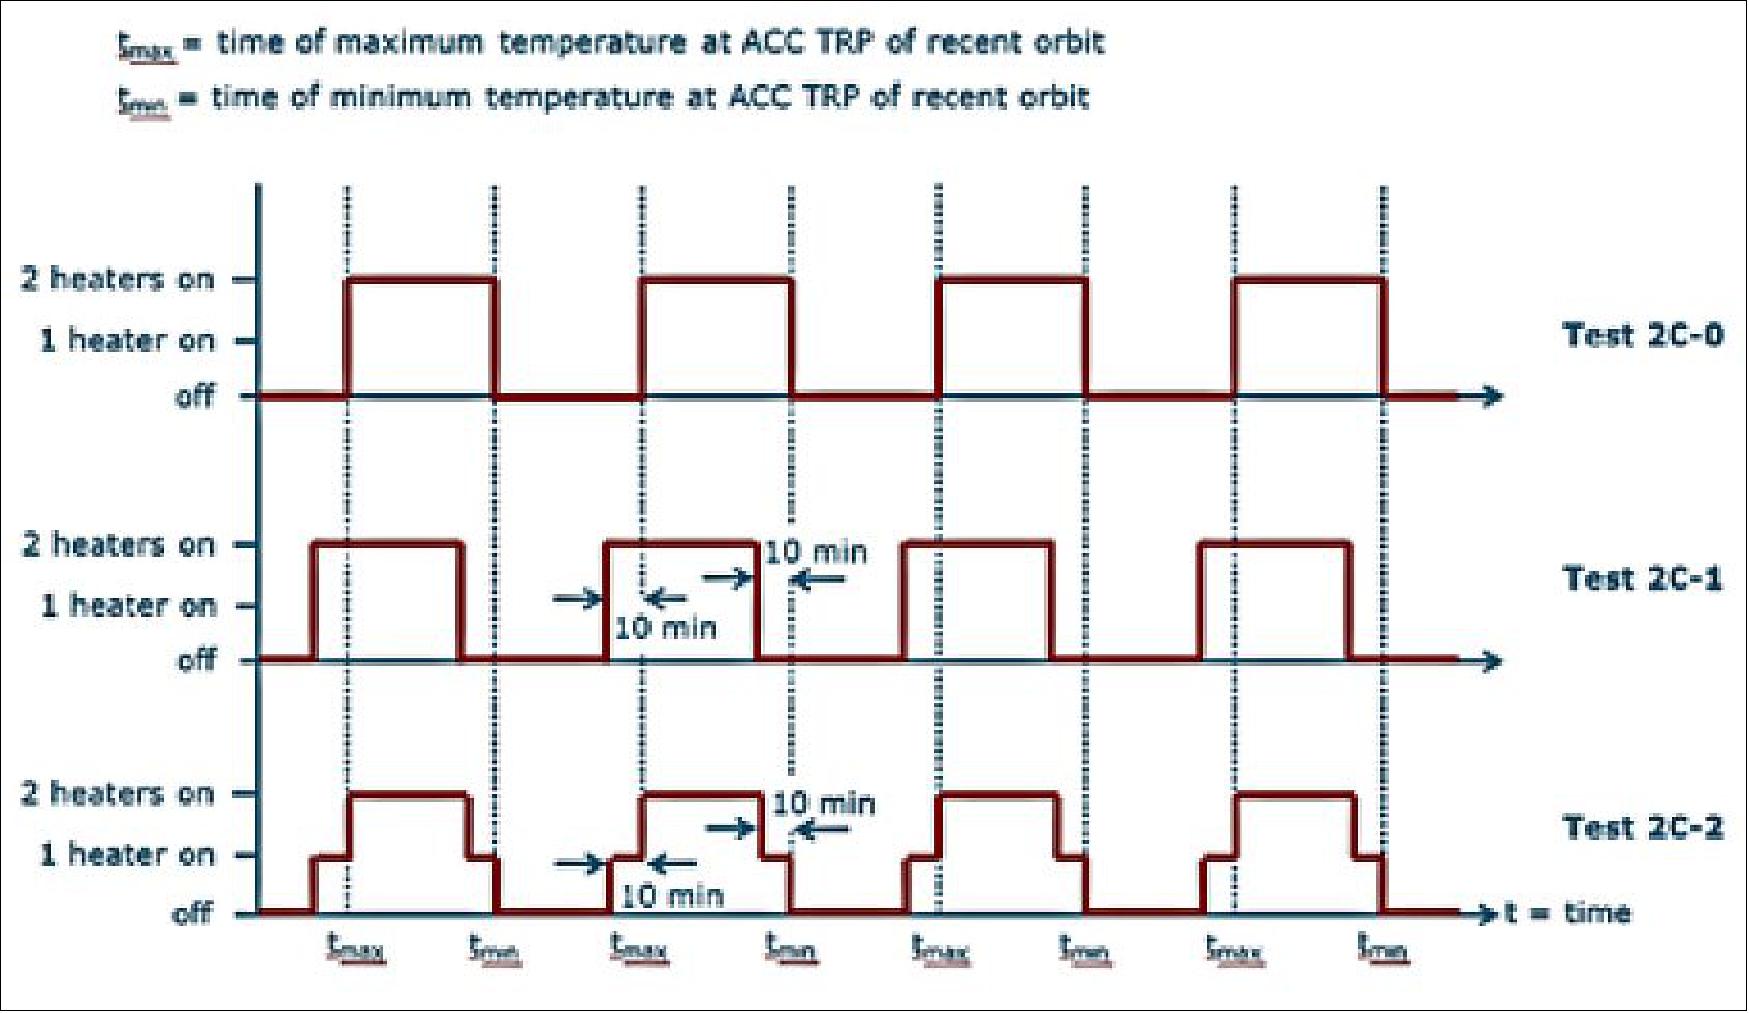 Figure 144: Example of heater profile activation during ACC thermal tests (image credit: Flight Control Team)